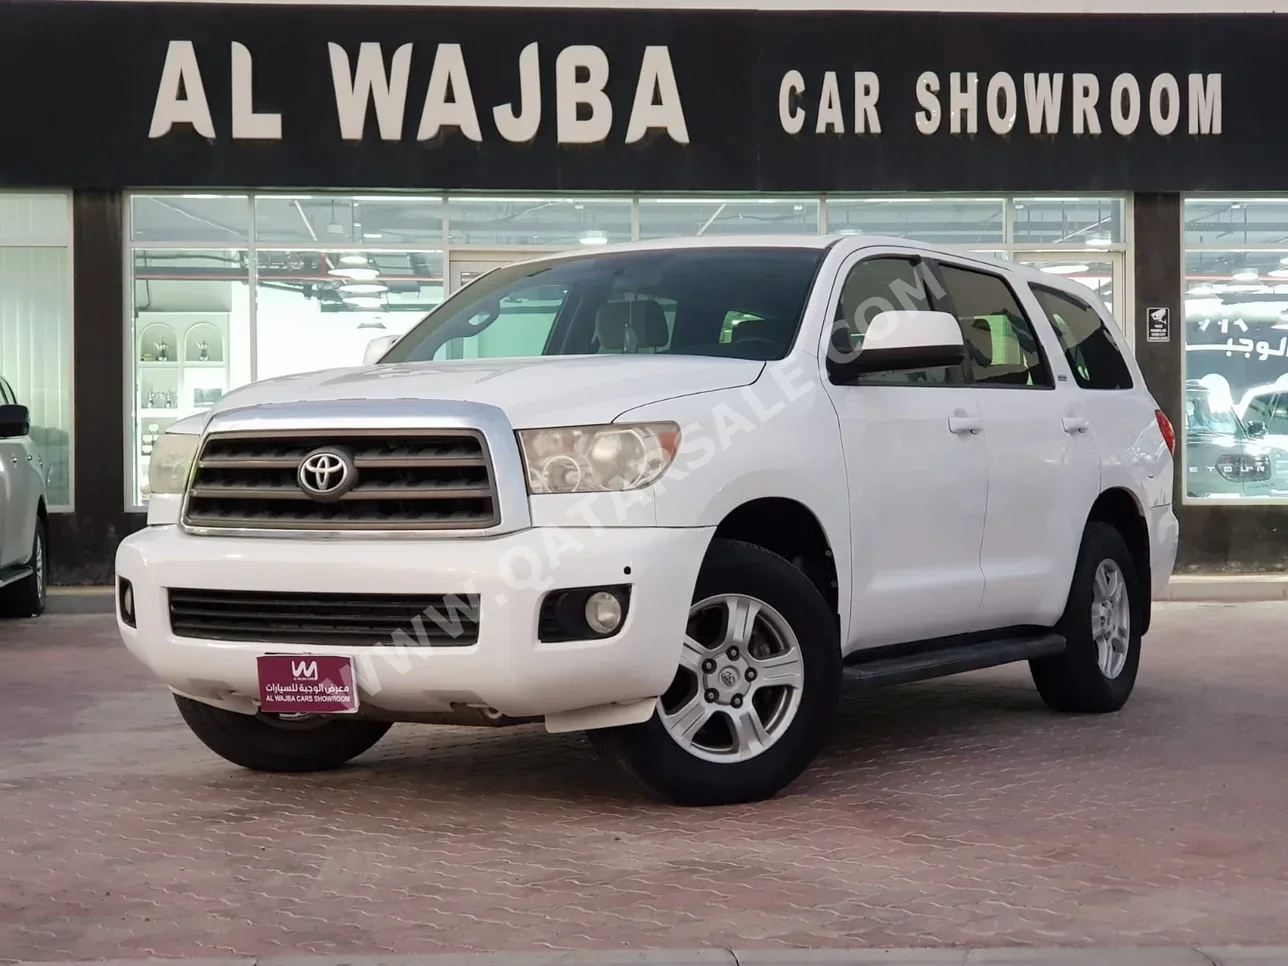 Toyota  Sequoia  SR5  2012  Automatic  273,000 Km  8 Cylinder  Four Wheel Drive (4WD)  SUV  White